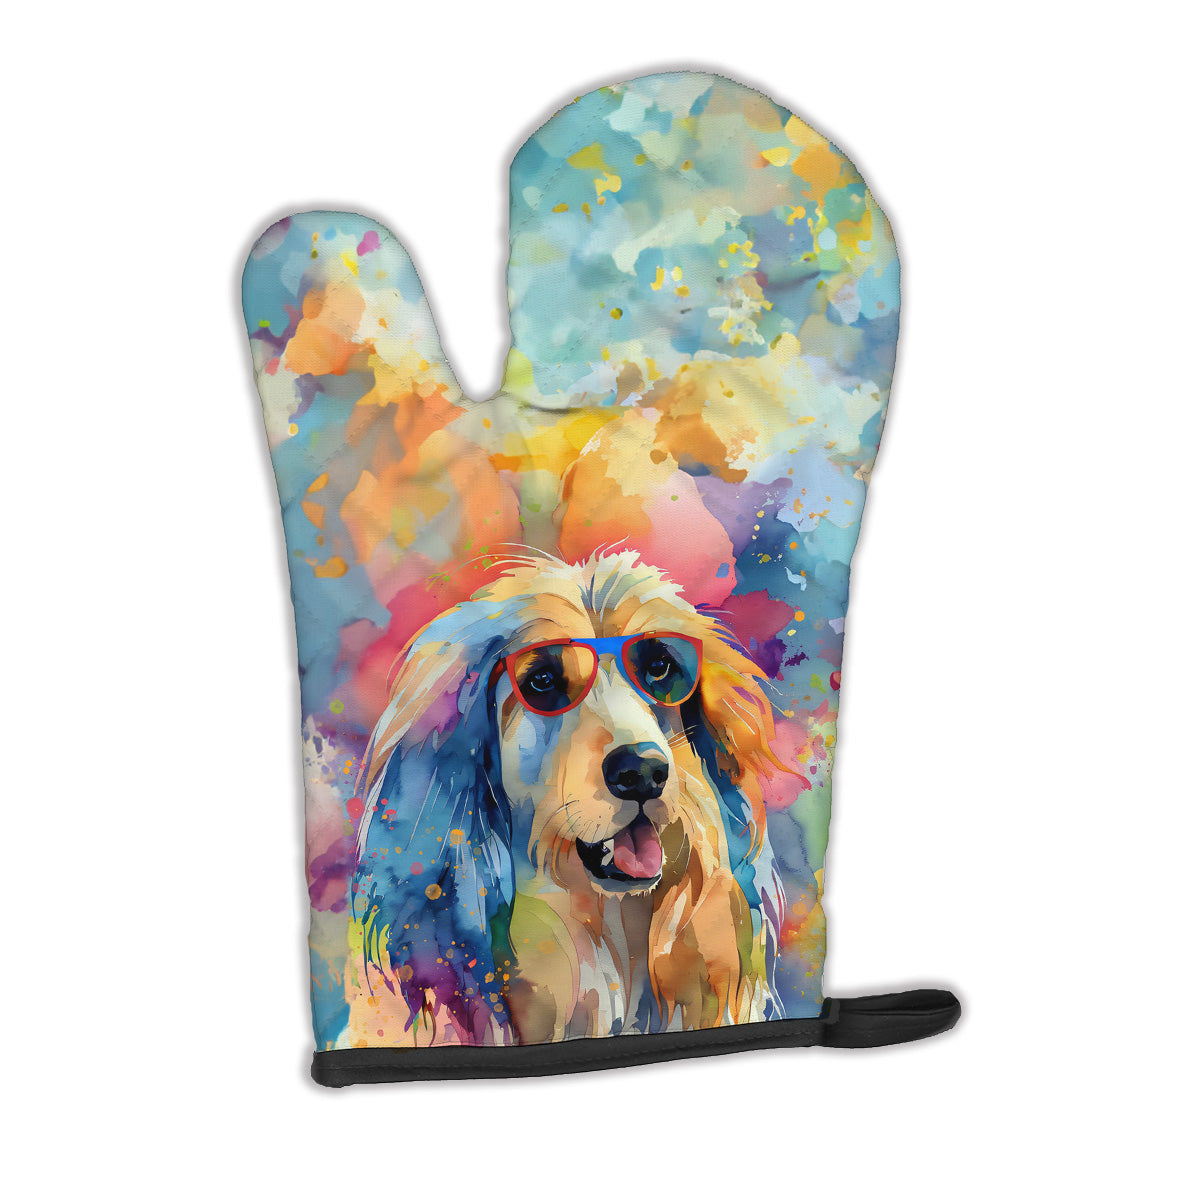 Buy this Afghan Hound Hippie Dawg Oven Mitt